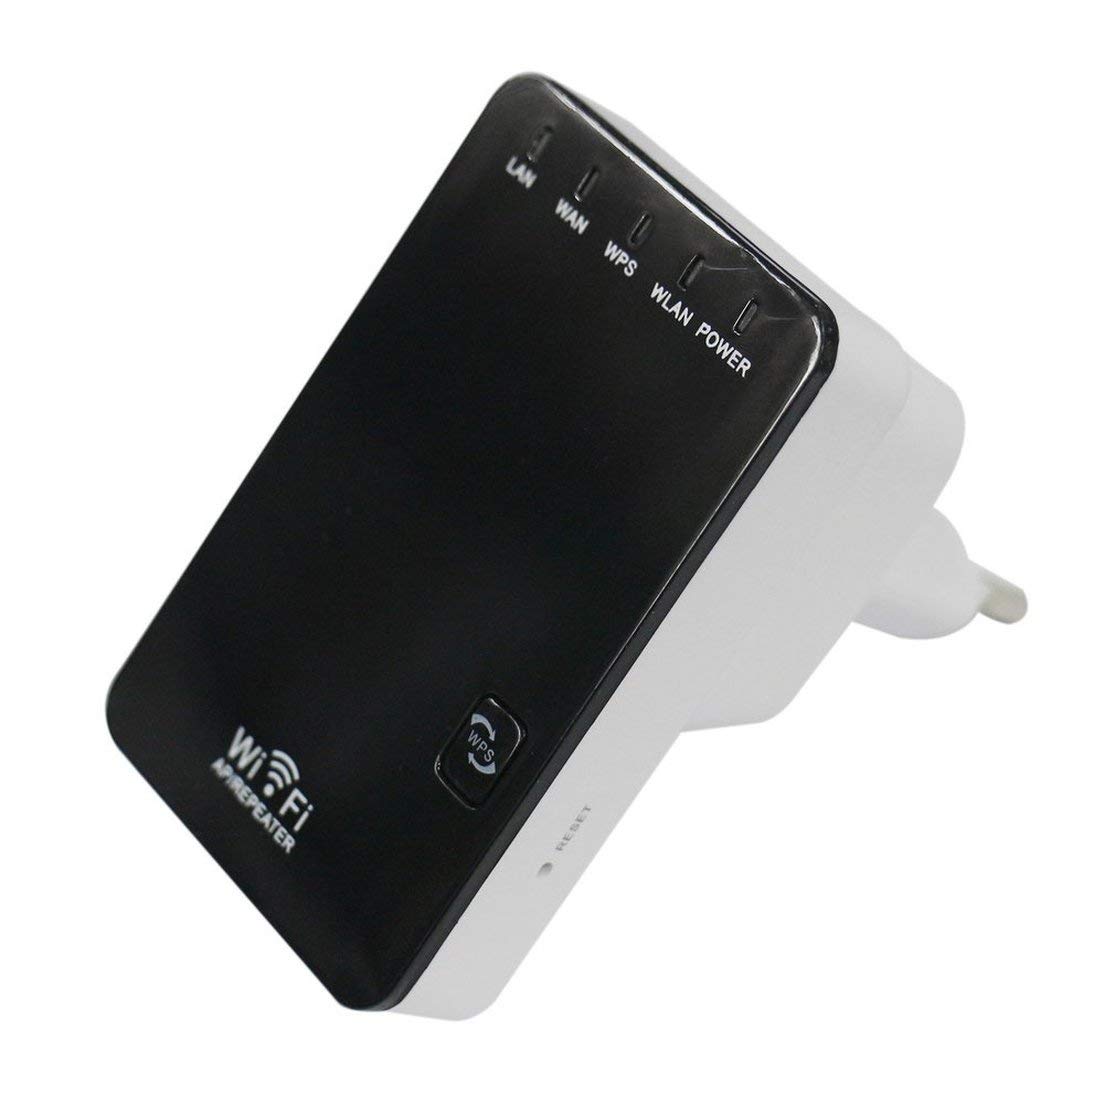 LouiseEvel215 1 Juego 300 Mbps Wireless-N Mini Router WiFi Repeater Extender Booster Amplificador Wireless N Mini Router Diseño de tamaño de Viaje